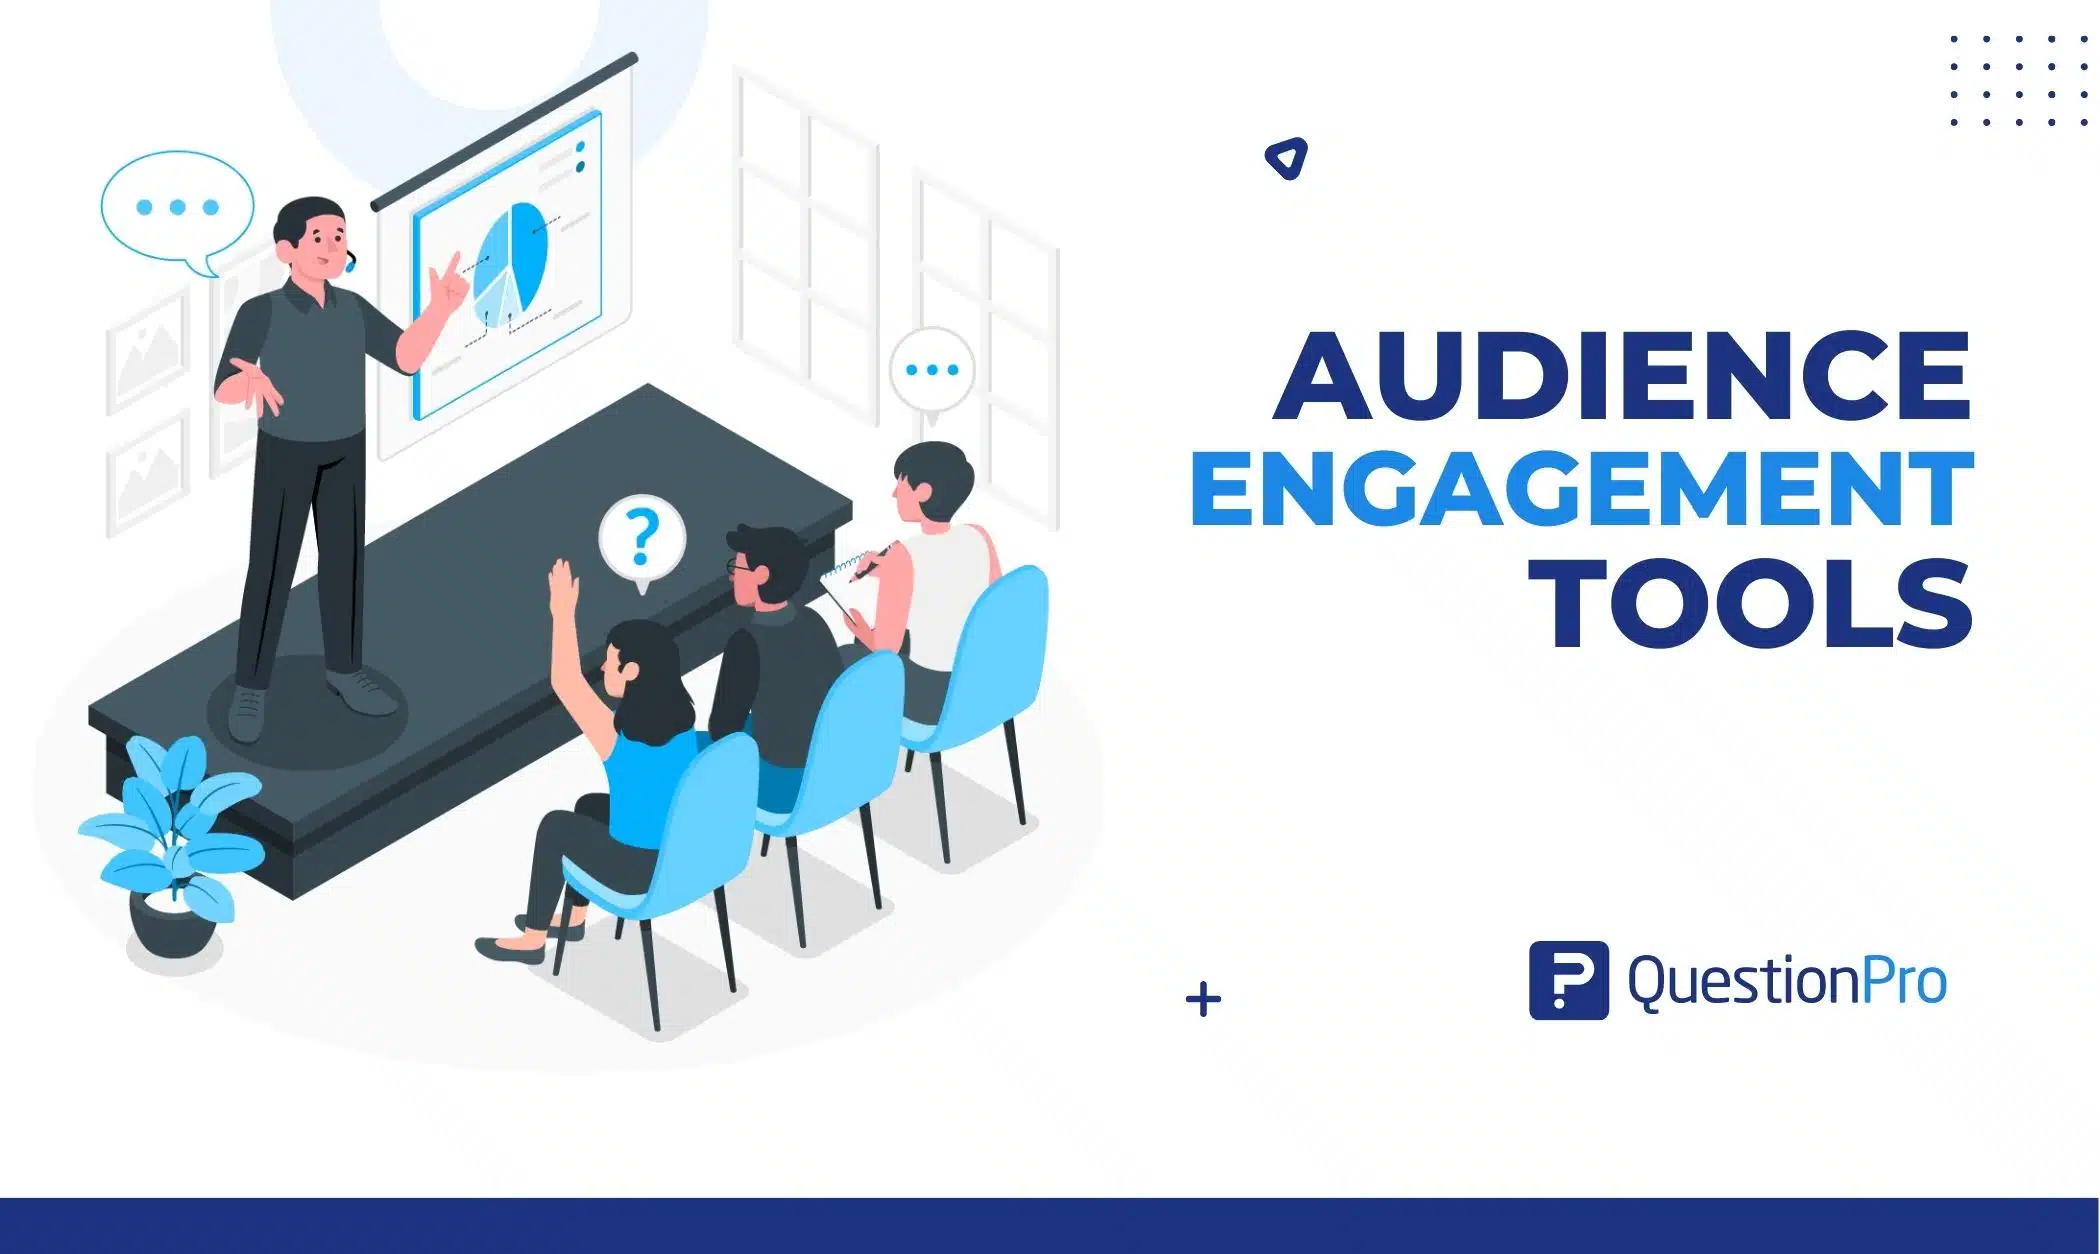 Audience engagement tools can be utilized in meetings, conferences, events, training sessions, and educational settings. Learn more.